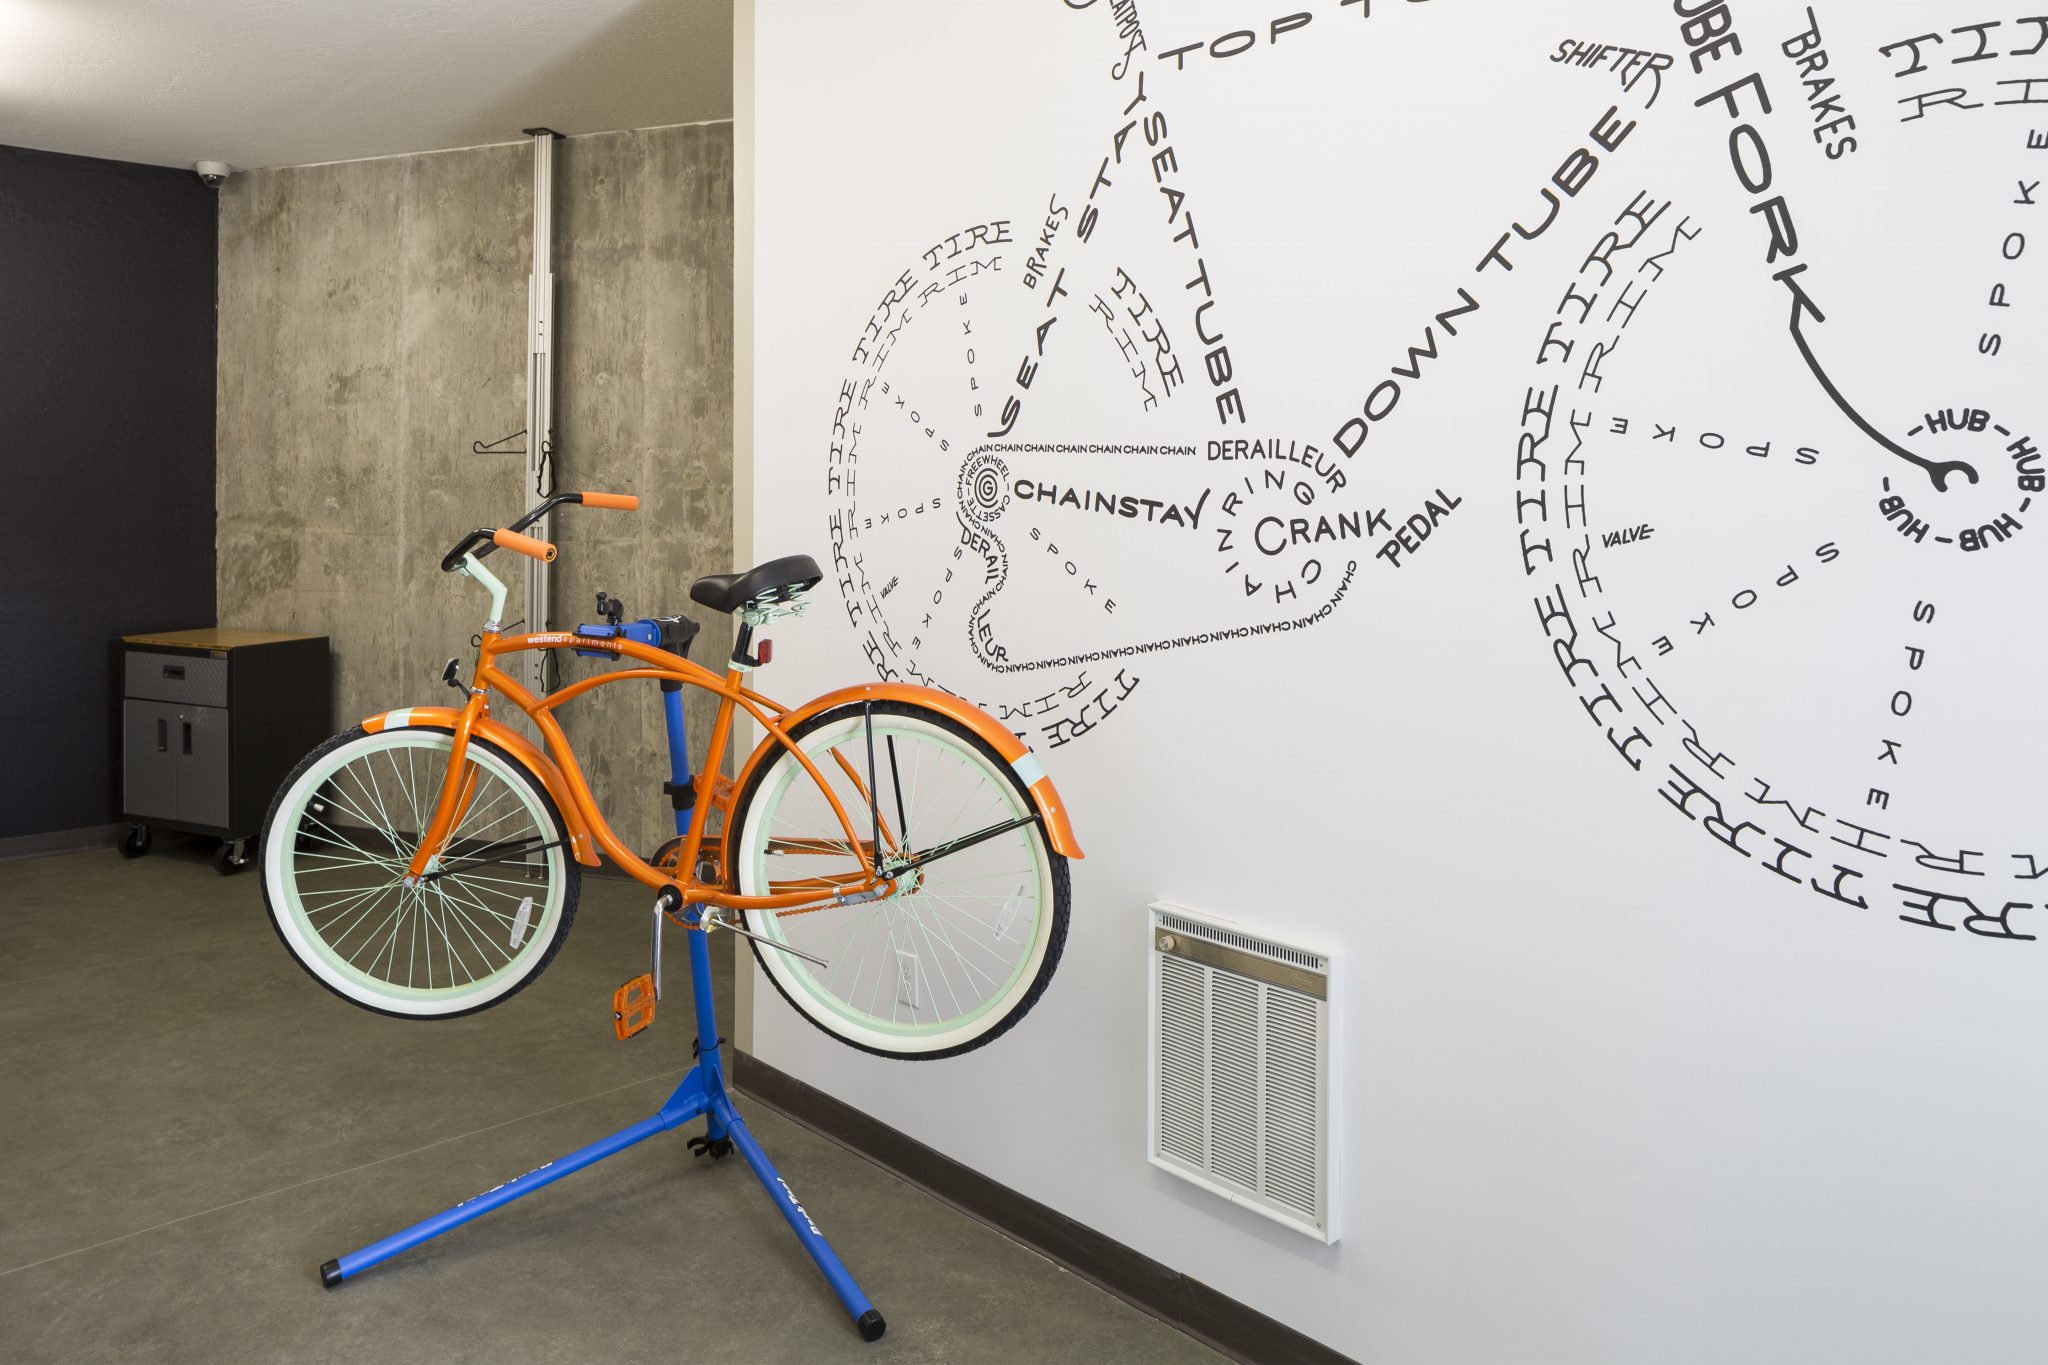 Interior with beach cruiser bicycle on work stand with bike graphic on wall behind it.